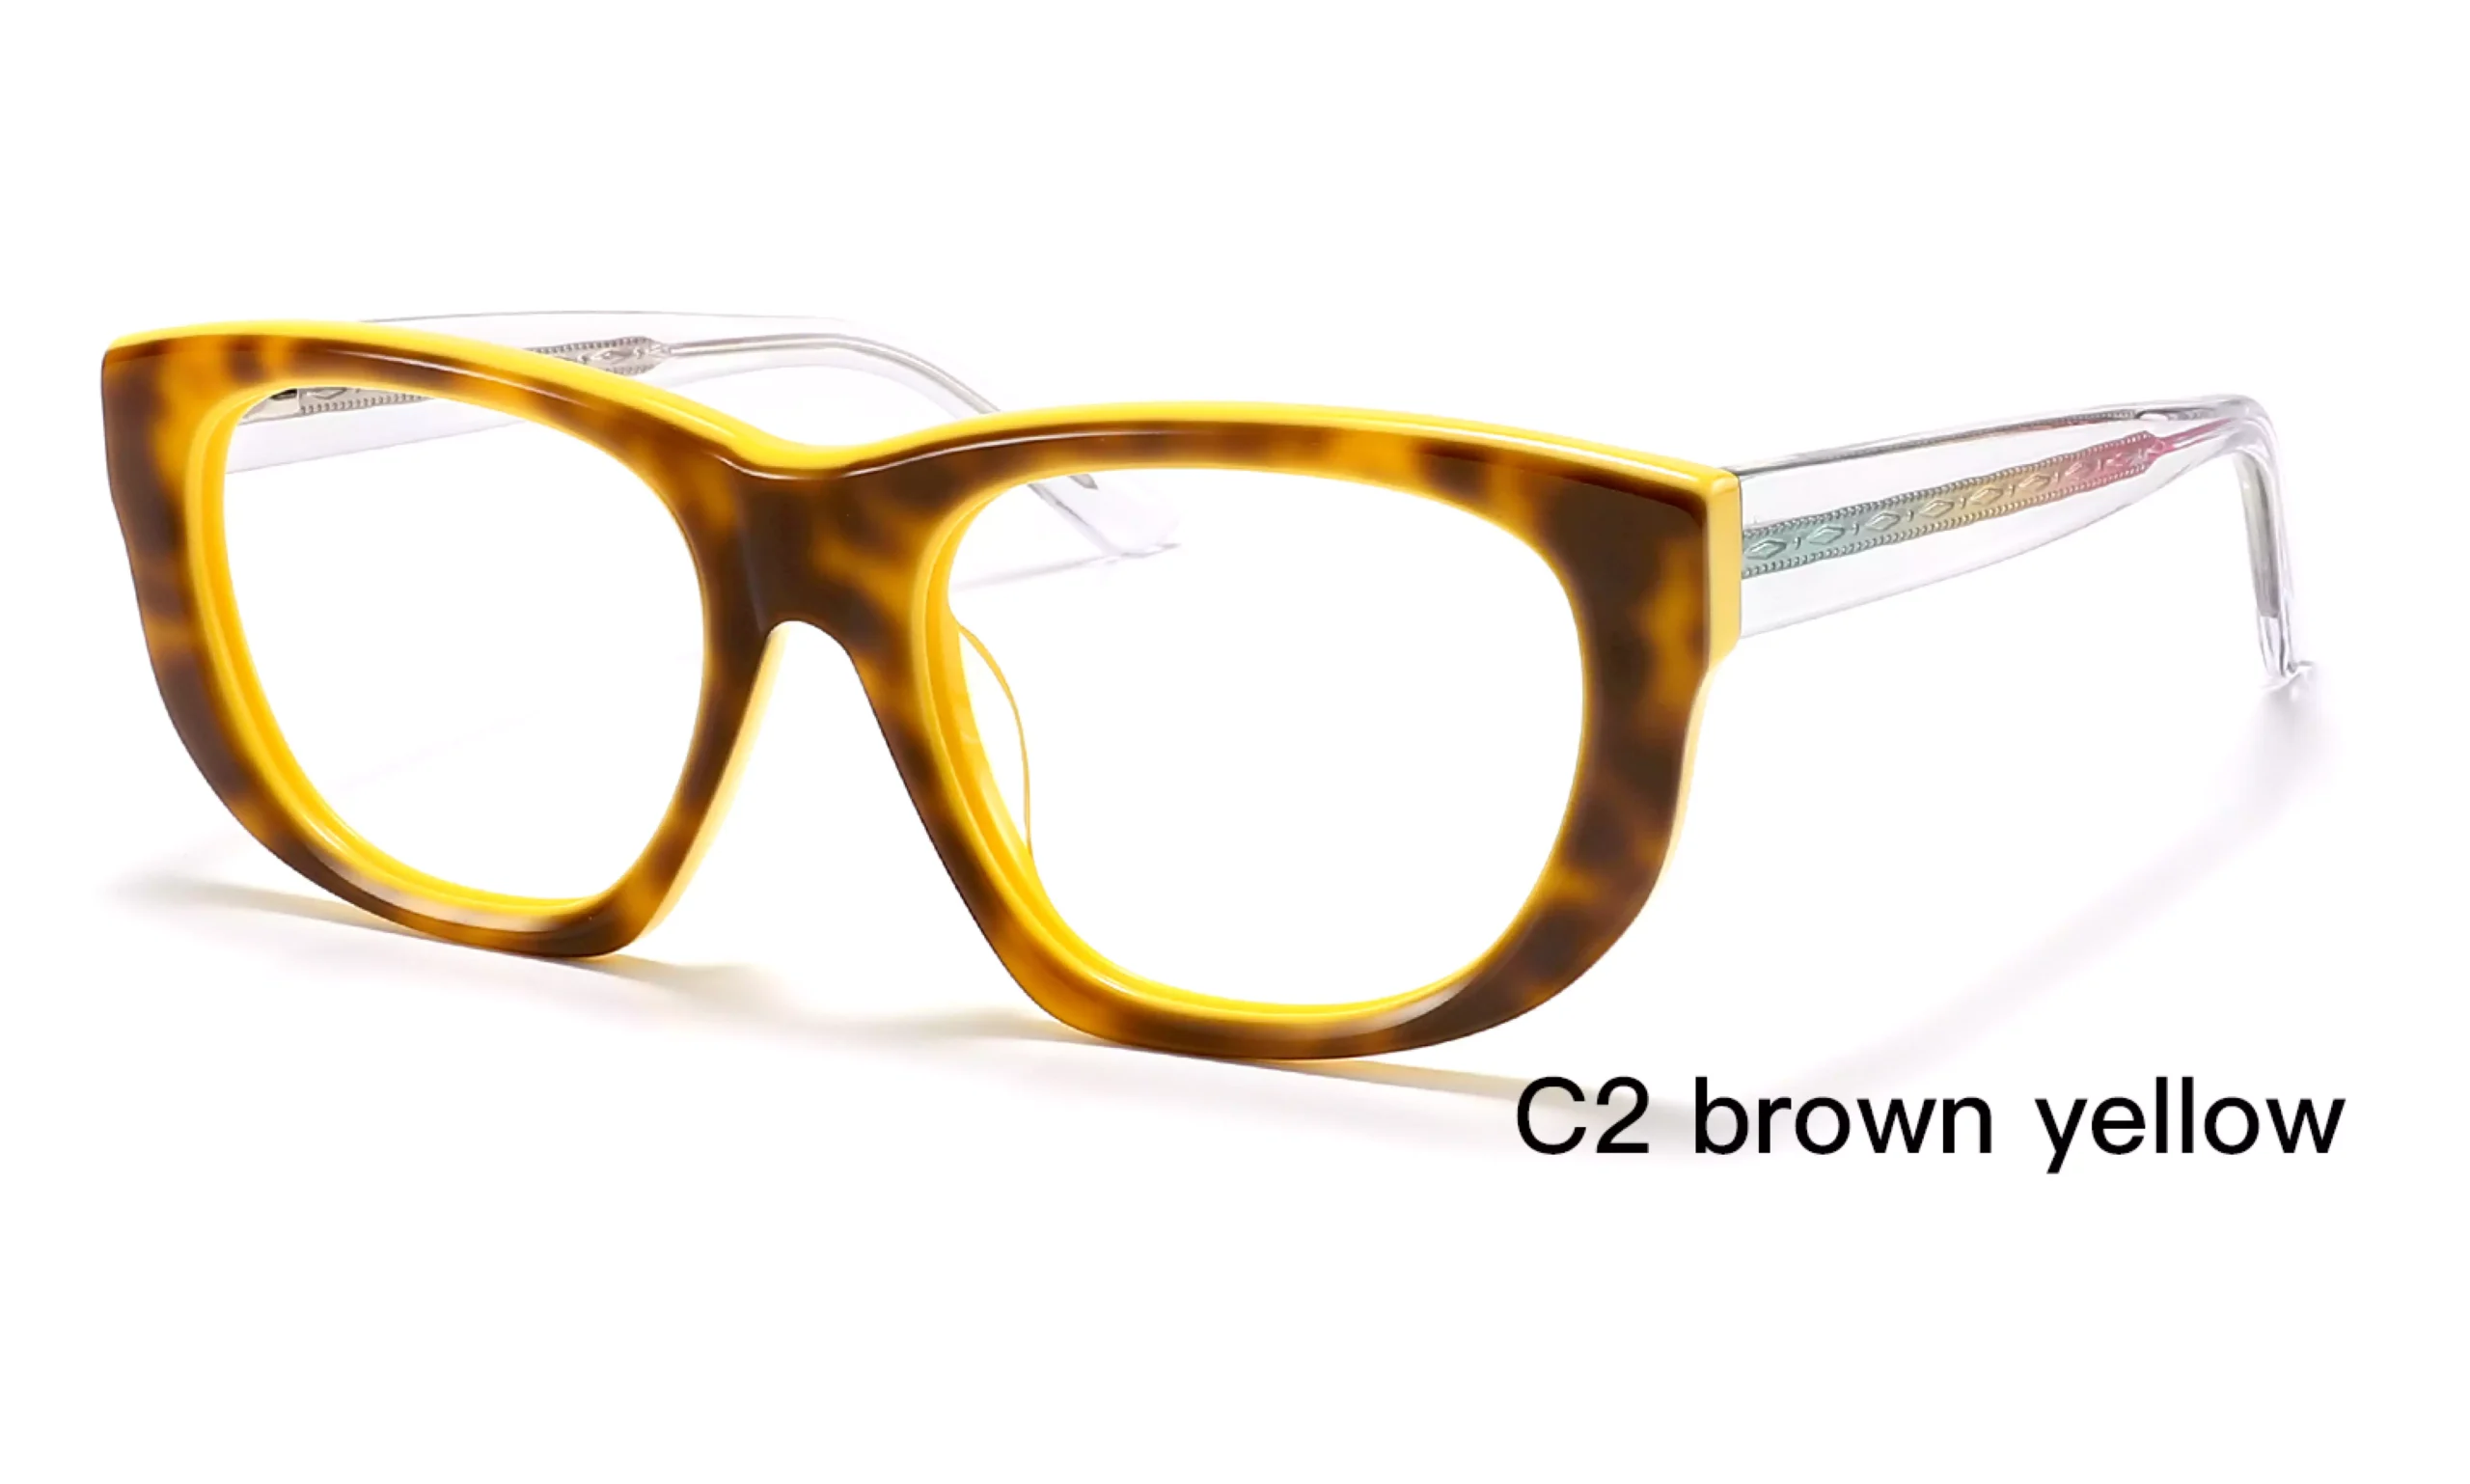 Wholesale, brown yellow, Clear temple, Oval, Eyeglass Frames,45 degree display, laser engraved wire core, gradient, diamond patterns